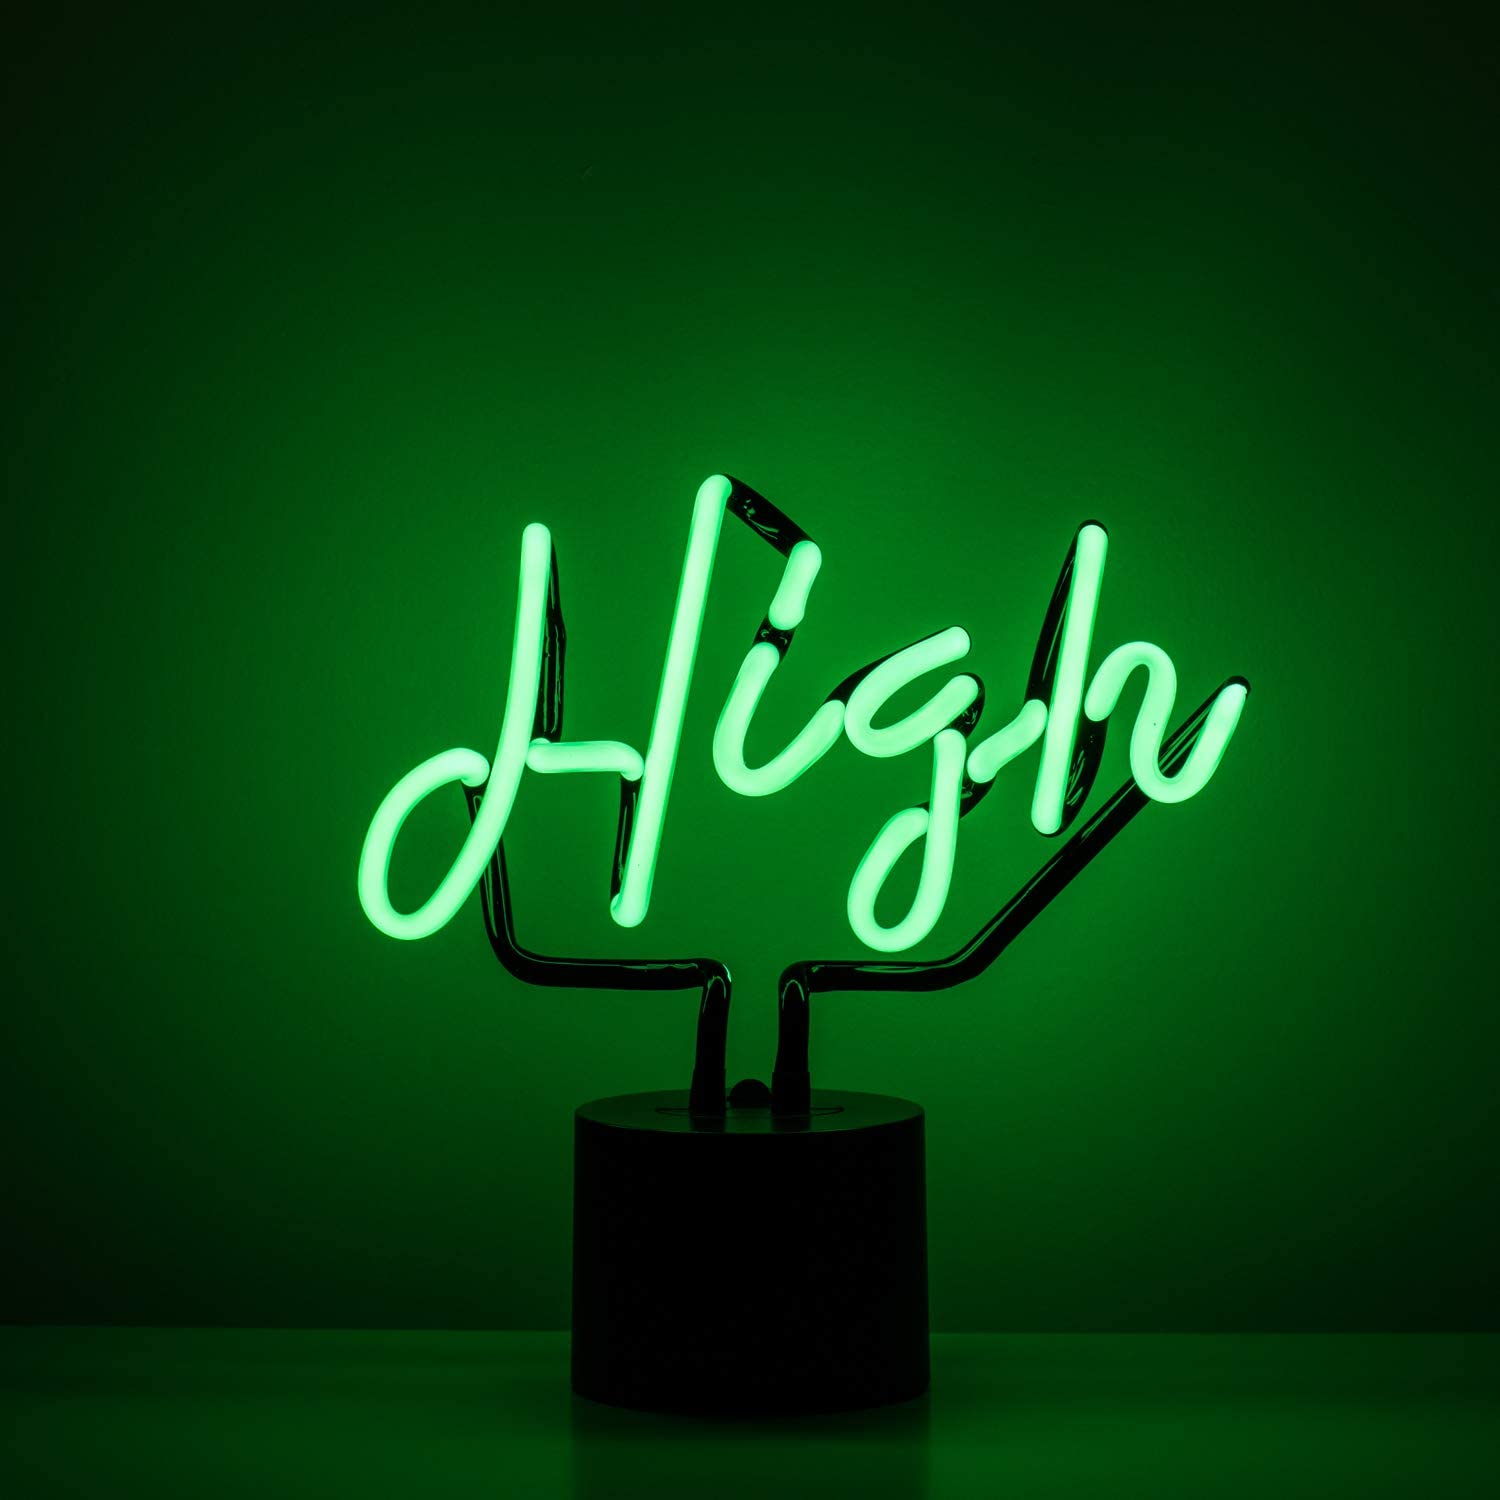 Amped & Co High Neon Desk Light, Real Neon, Green, Cursive Typography Font, 9x9 inches, Home Decor Neon Signs for Unique Rooms and Gifts